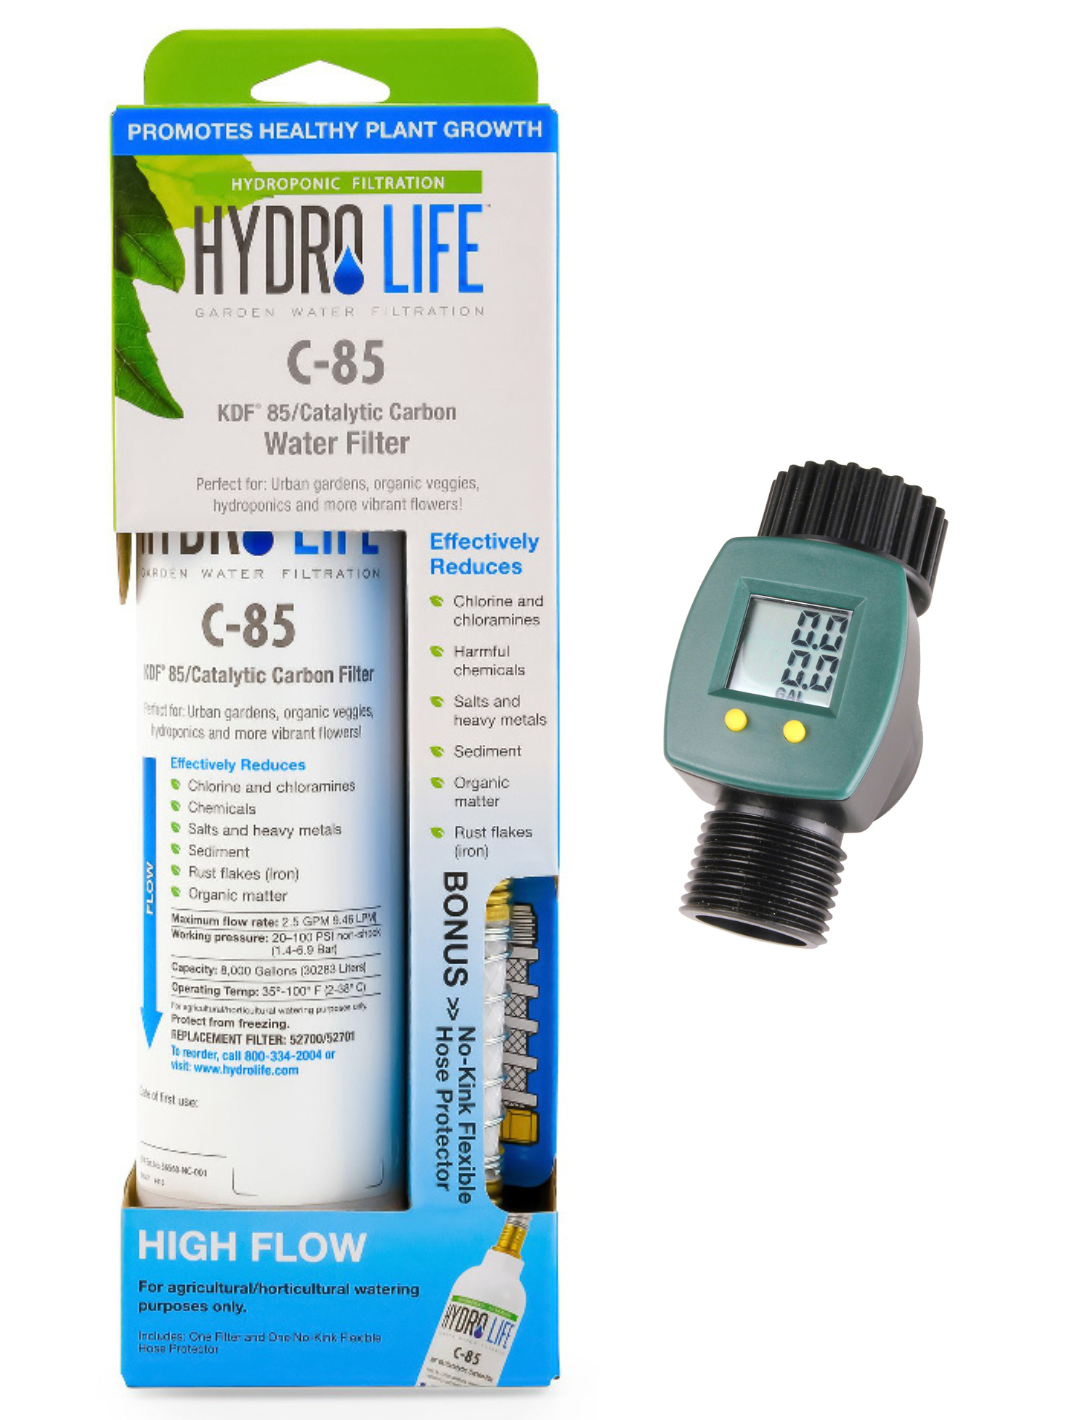 Hydro Life C-85 Water Filter with No-Kink Flex Hose Protector with Save A Drop Water Meter